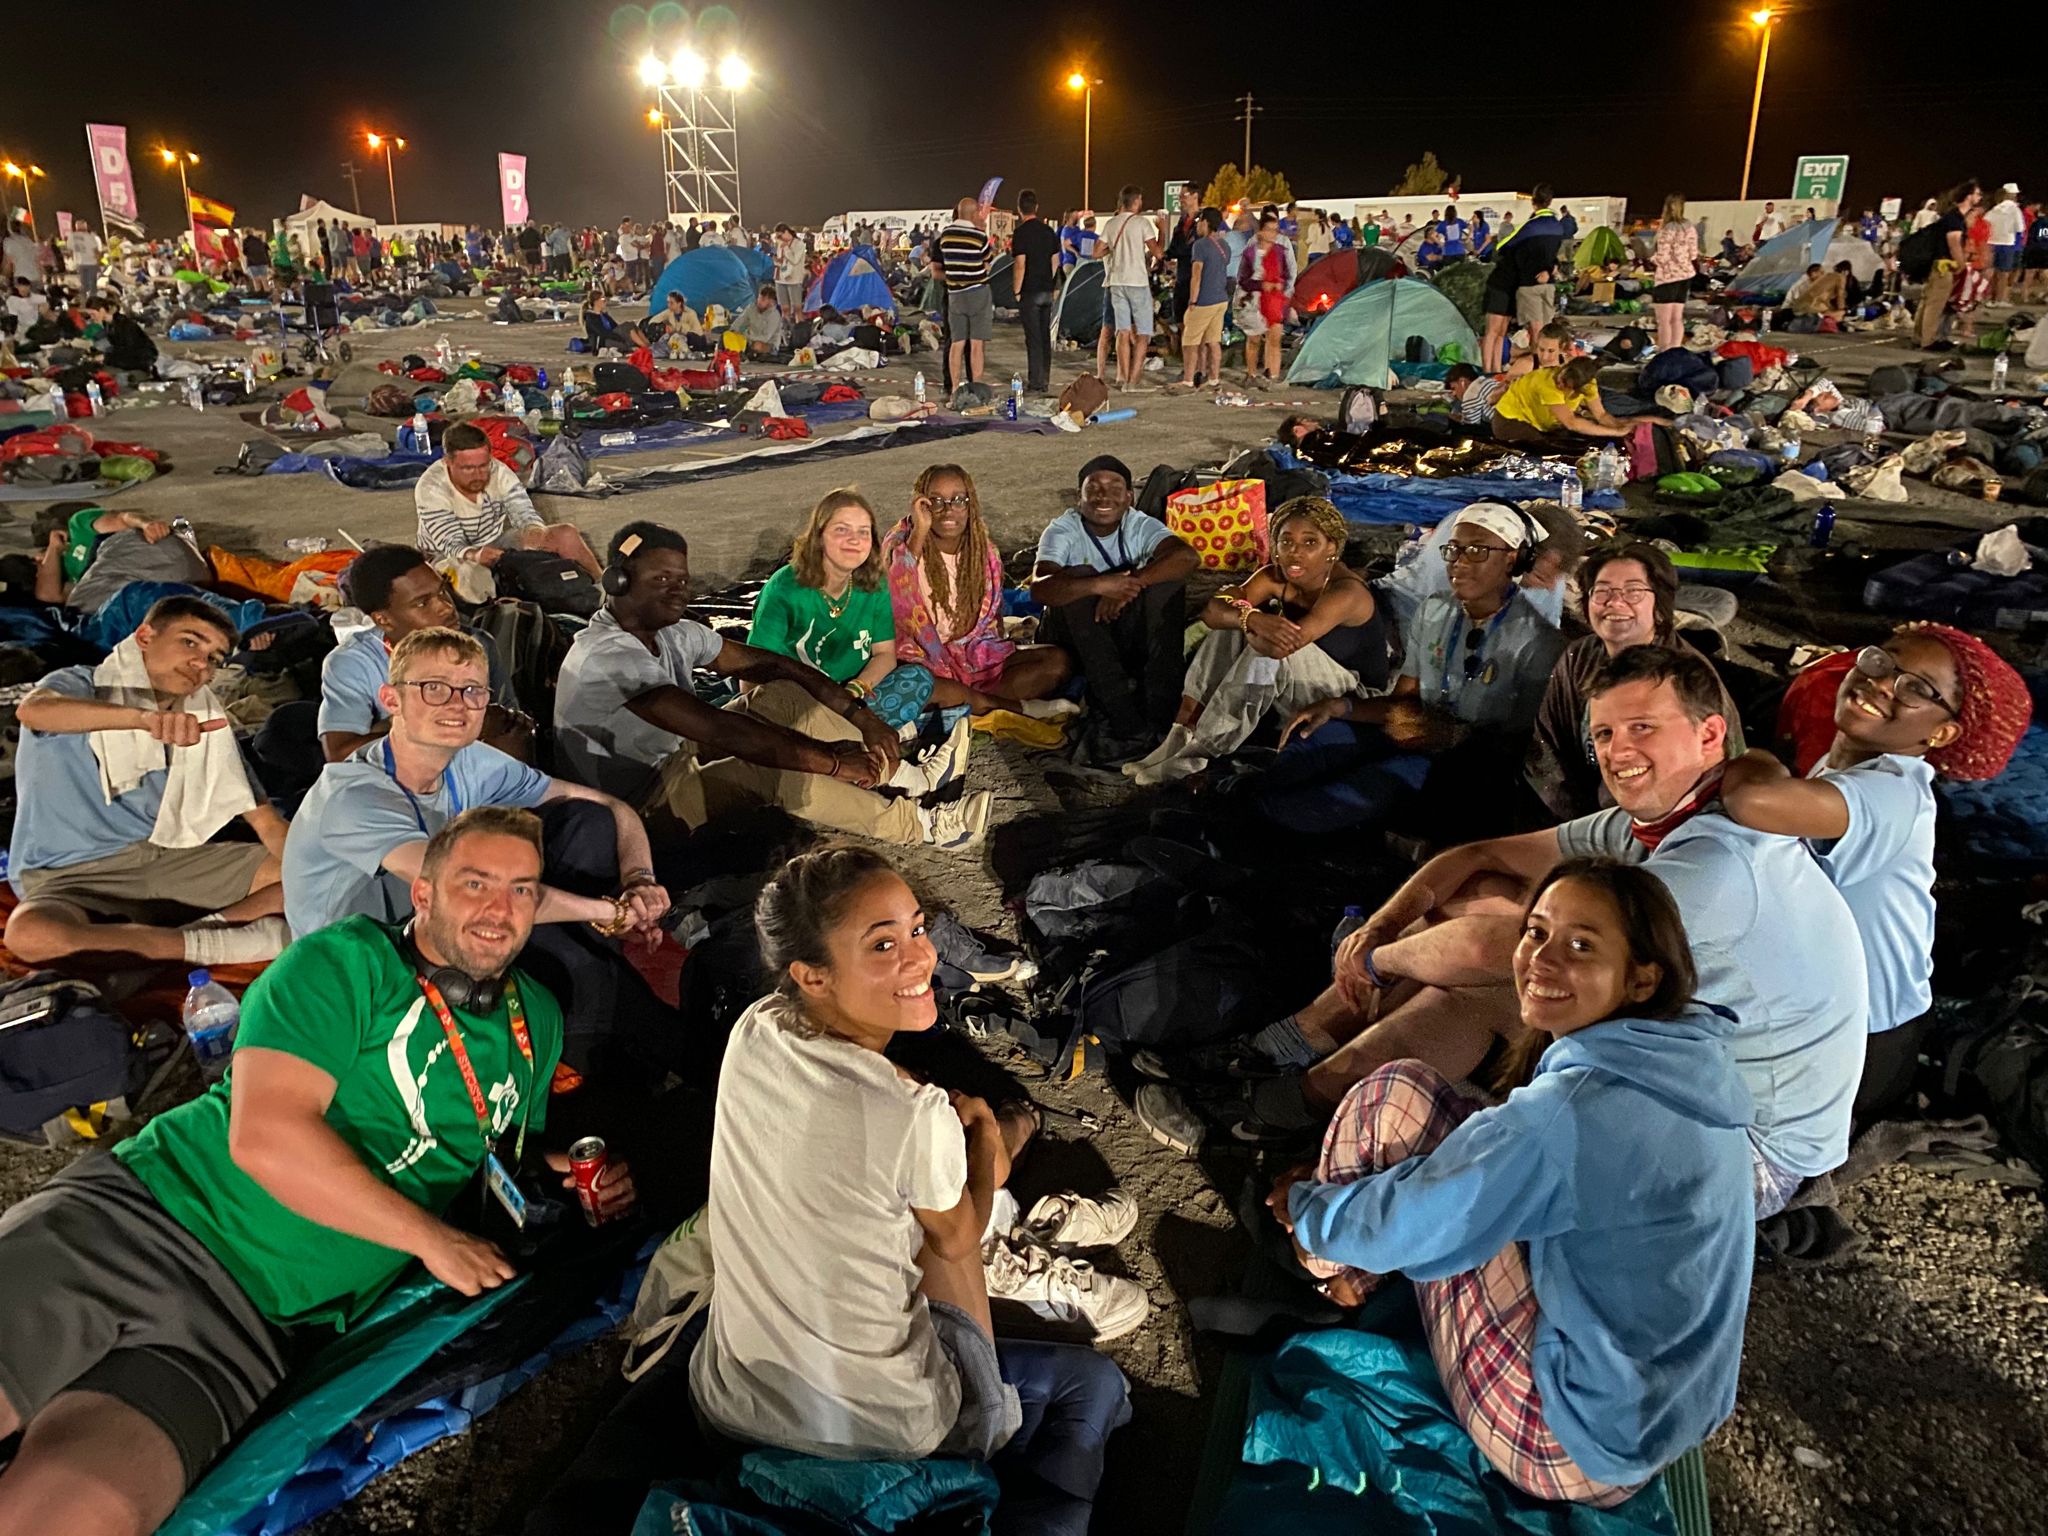 Young adults return from World Youth Day renewed by hope and mission